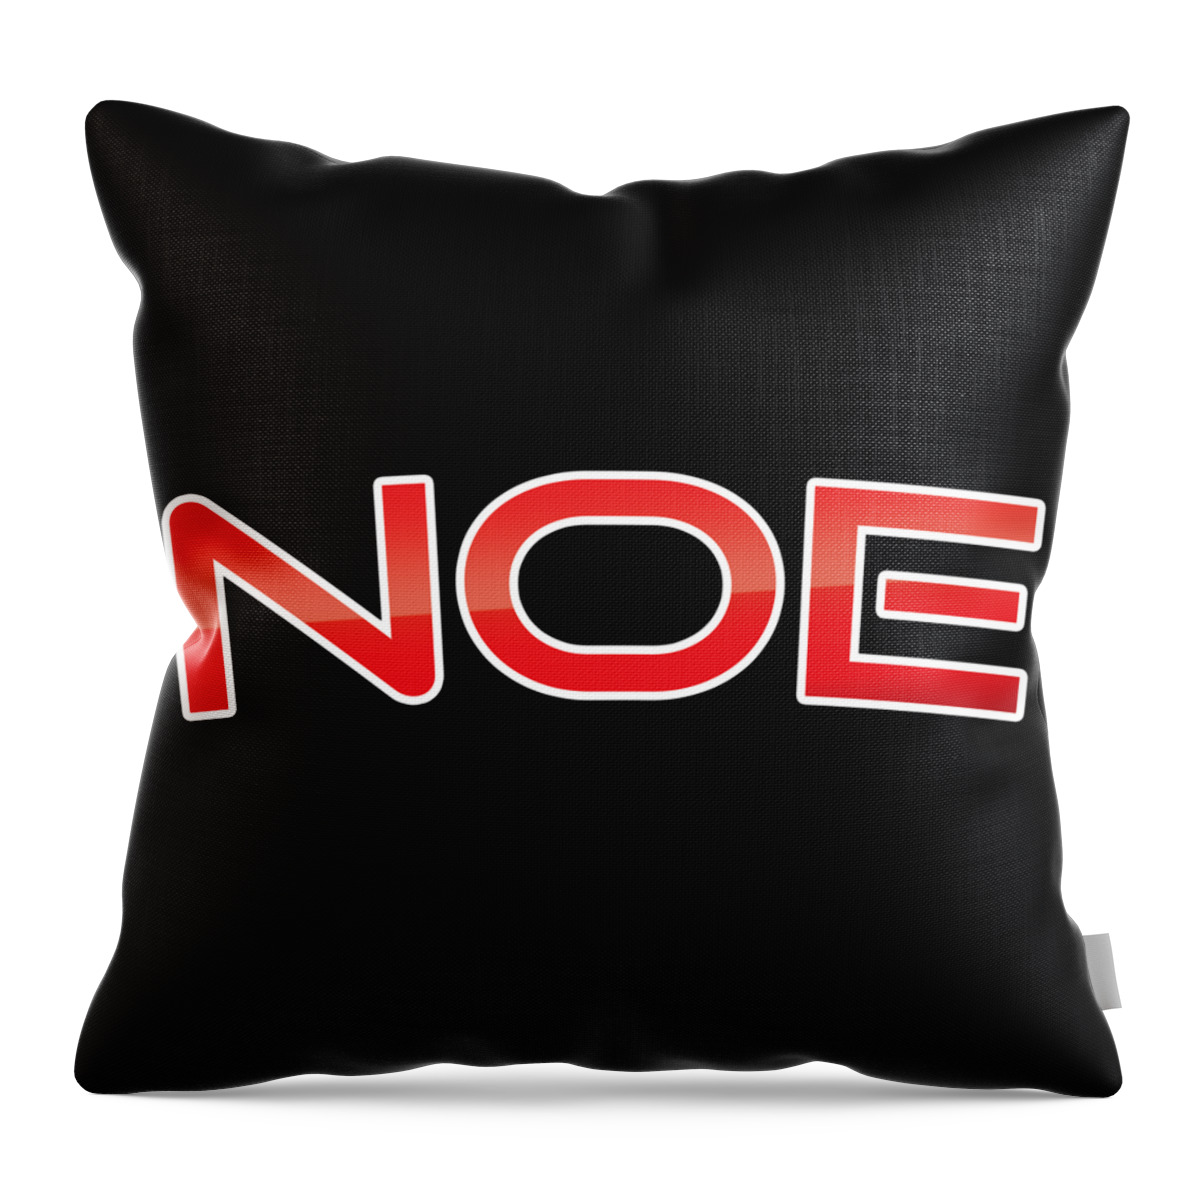 Noe Throw Pillow featuring the digital art Noe by TintoDesigns